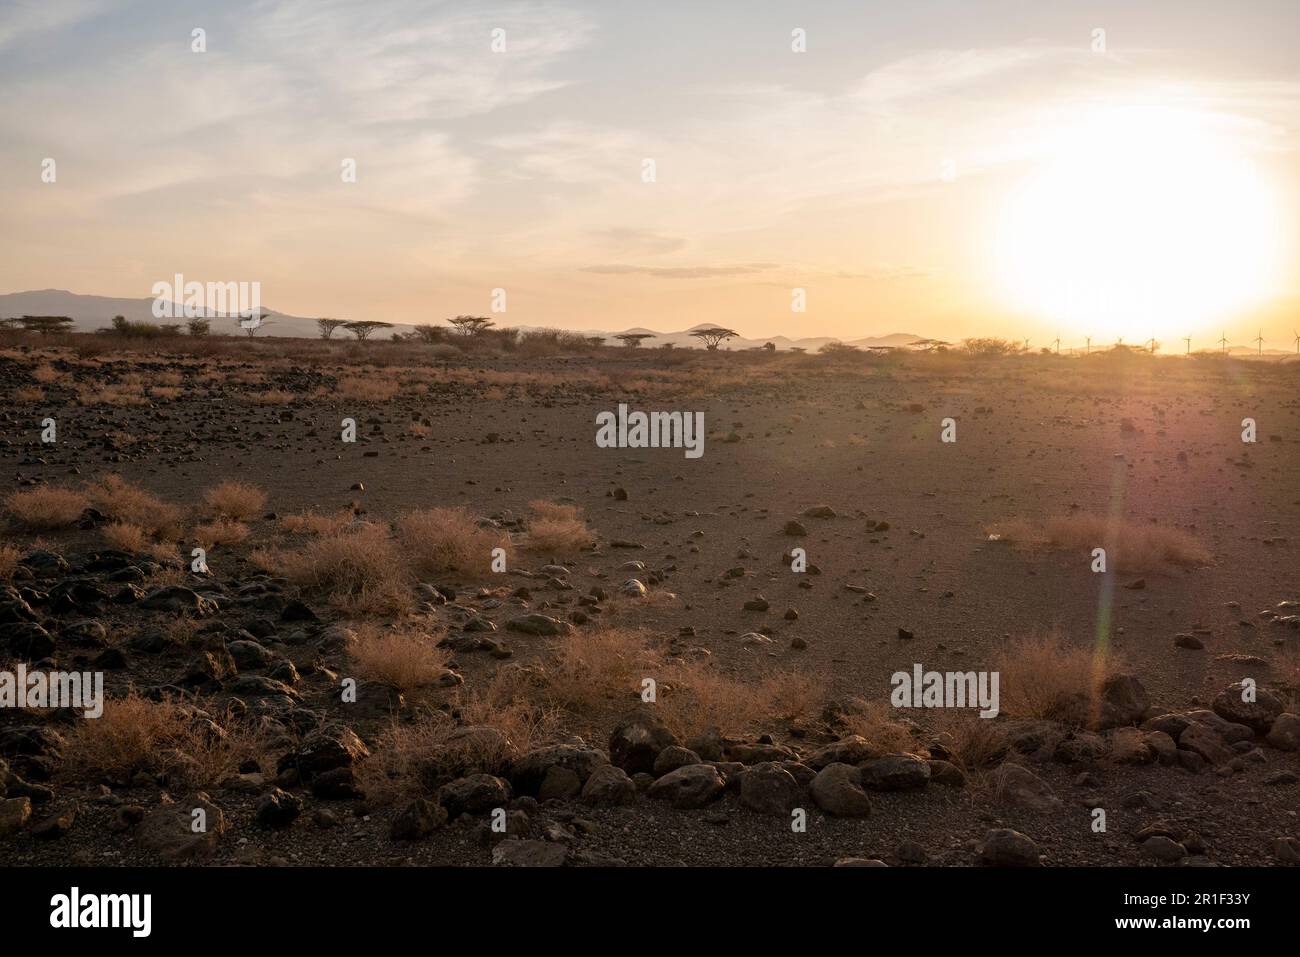 Sun sets over the remote Chalbi desert in north-eastern Kenya Stock Photo